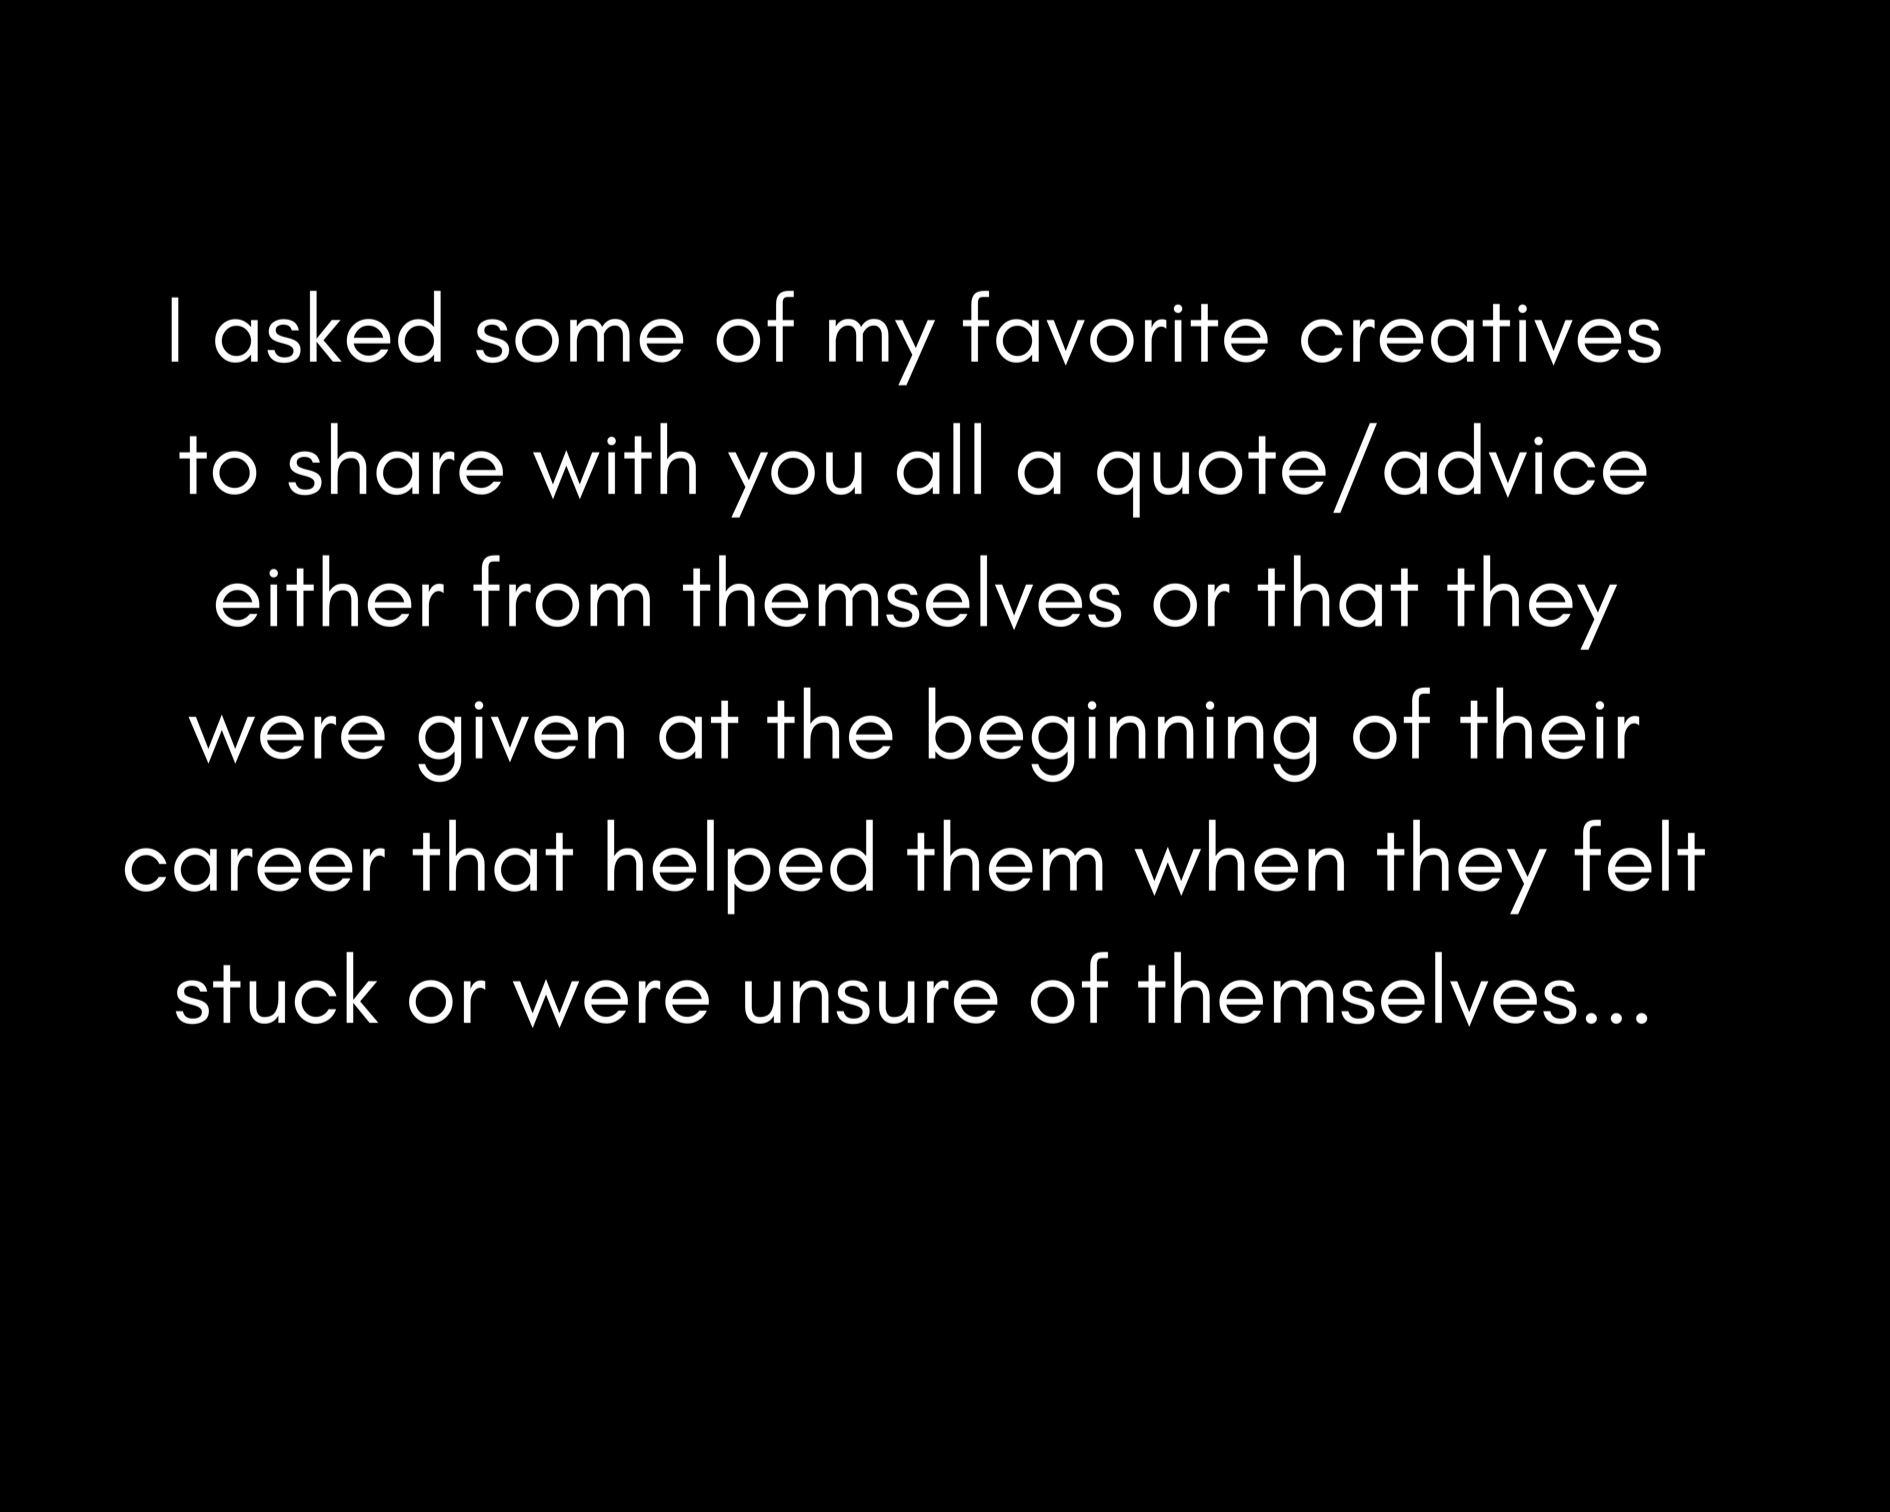 I asked some of my favorite creatives to share with you all a quoteadvice either from themselves or that they were given at the beginning of their career that helped them when they felt stuck or were unsure of themselves....PNG